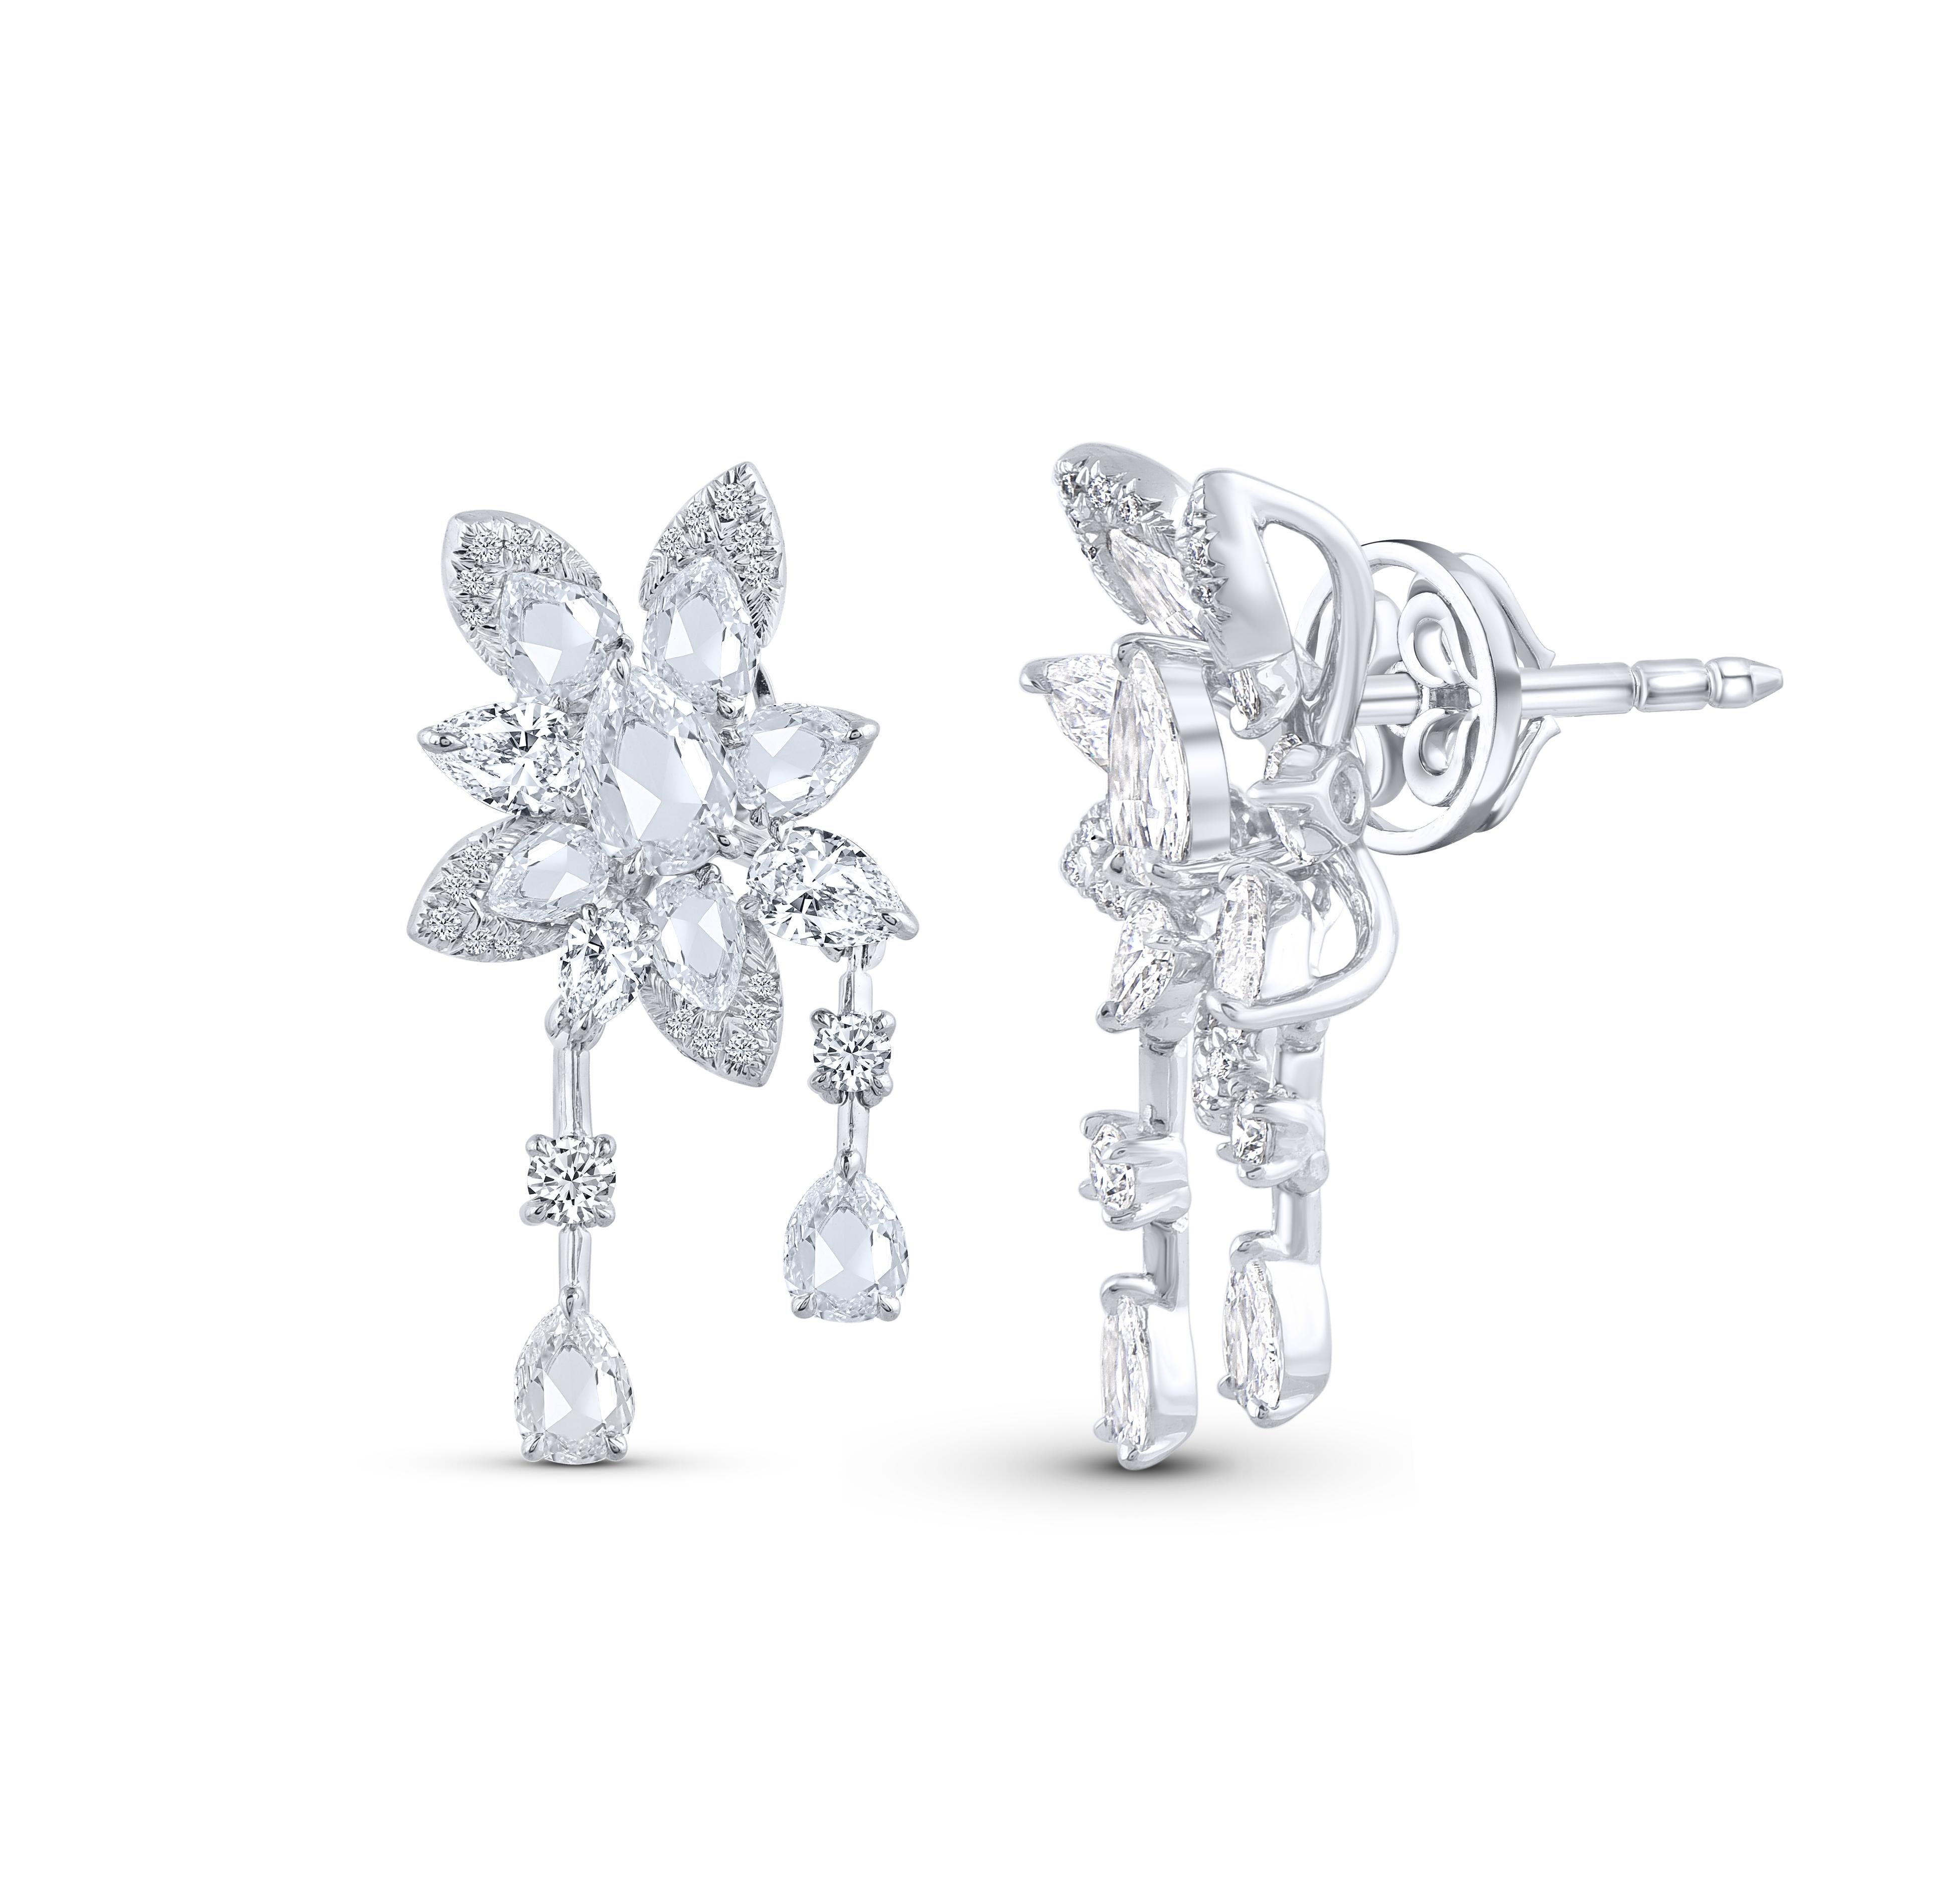 A beautiful arrangement of brilliant and rose cut diamonds come together to create these drop earrings which is a part of our Cascade collection. Studded with 44 round, 6 pear and 16 rose cut pear diamonds. 

Inspired by the beauty of the naturally